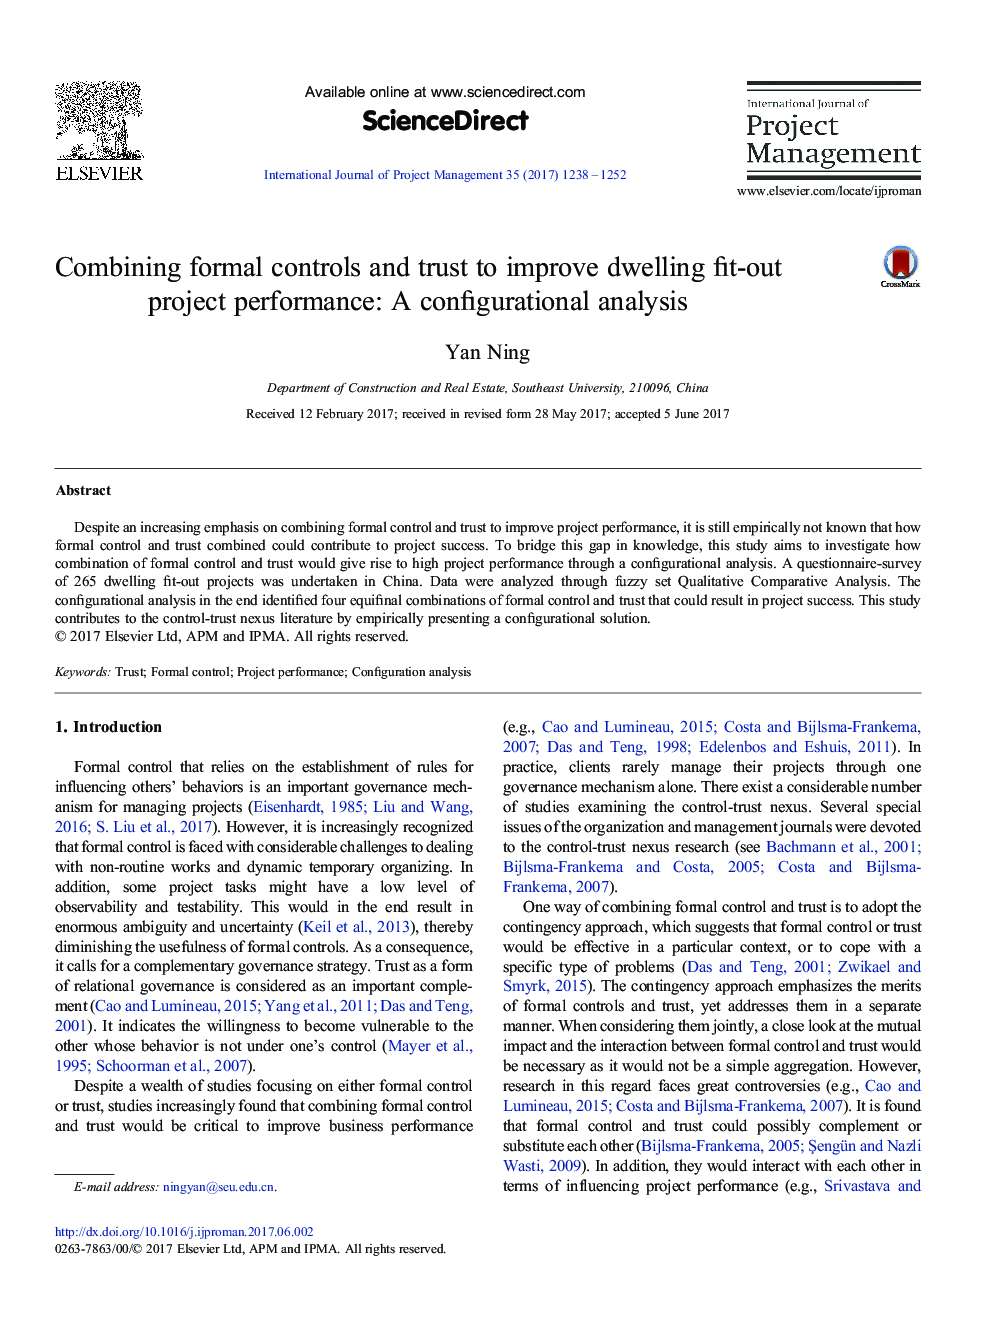 Combining formal controls and trust to improve dwelling fit-out project performance: A configurational analysis